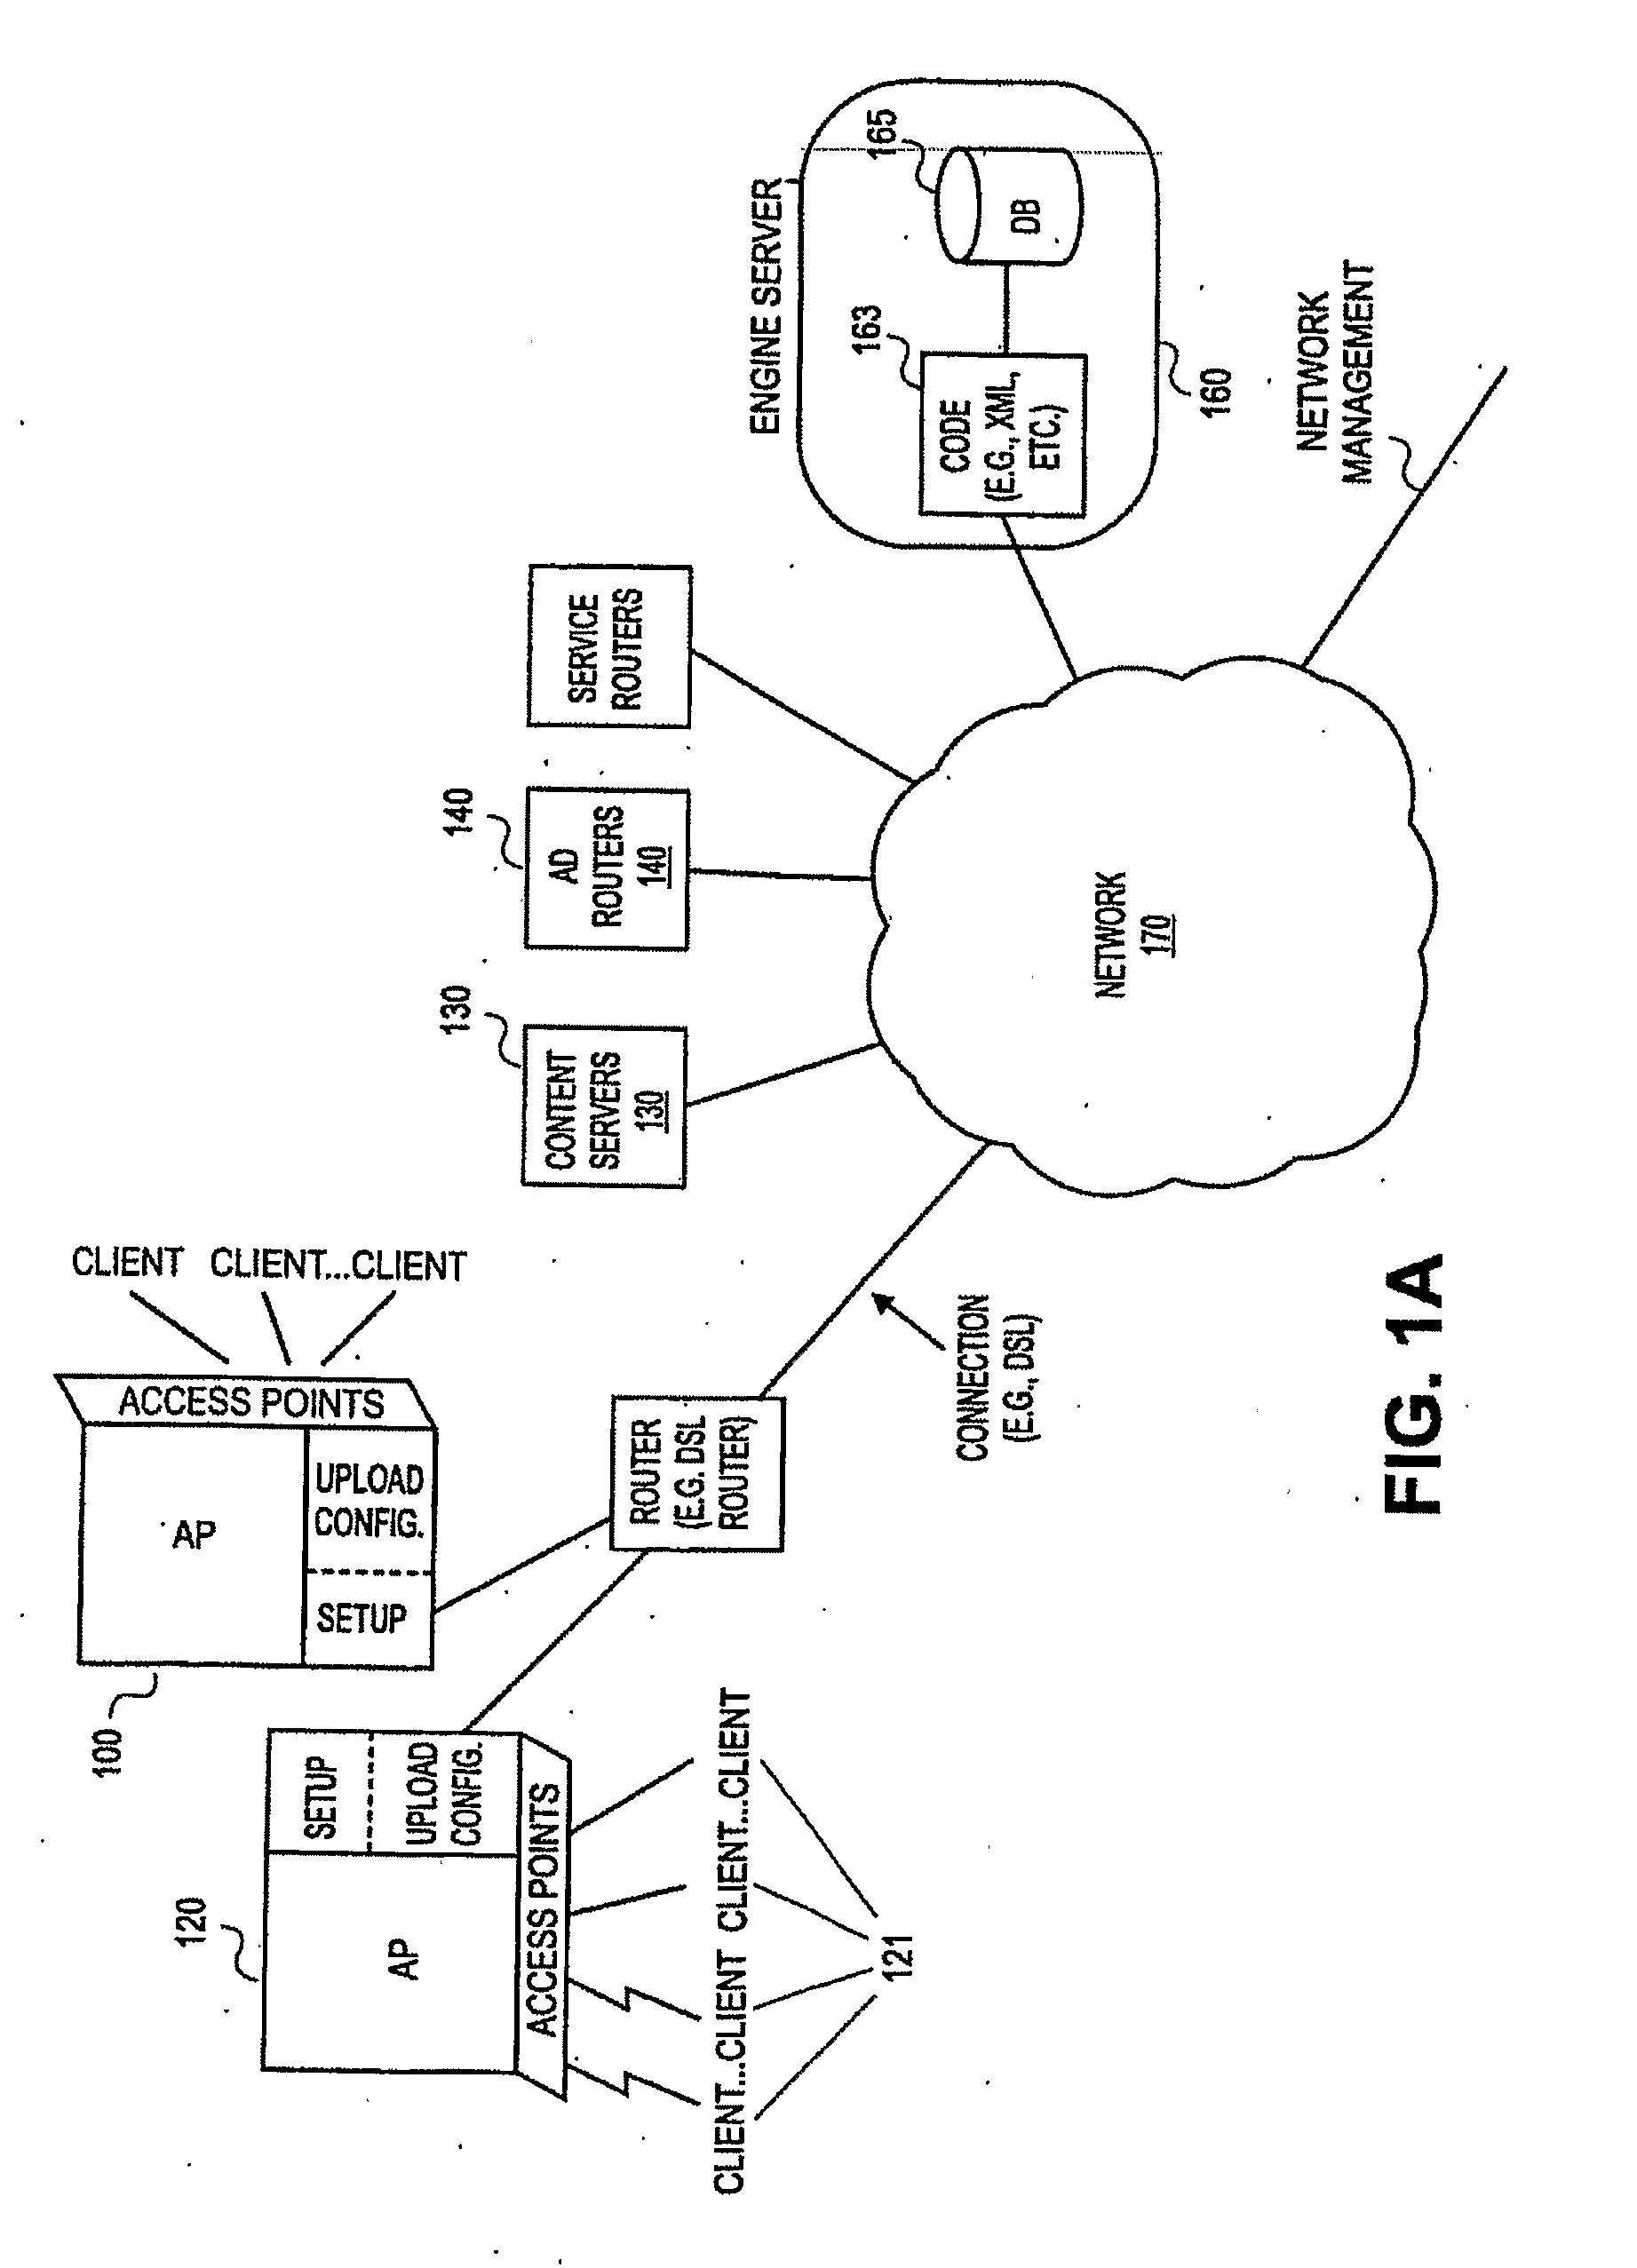 Systems and Methods of Network Operation and Information Processing, Including Data Acquisition, Processing and Provision and/or Interoperability Features